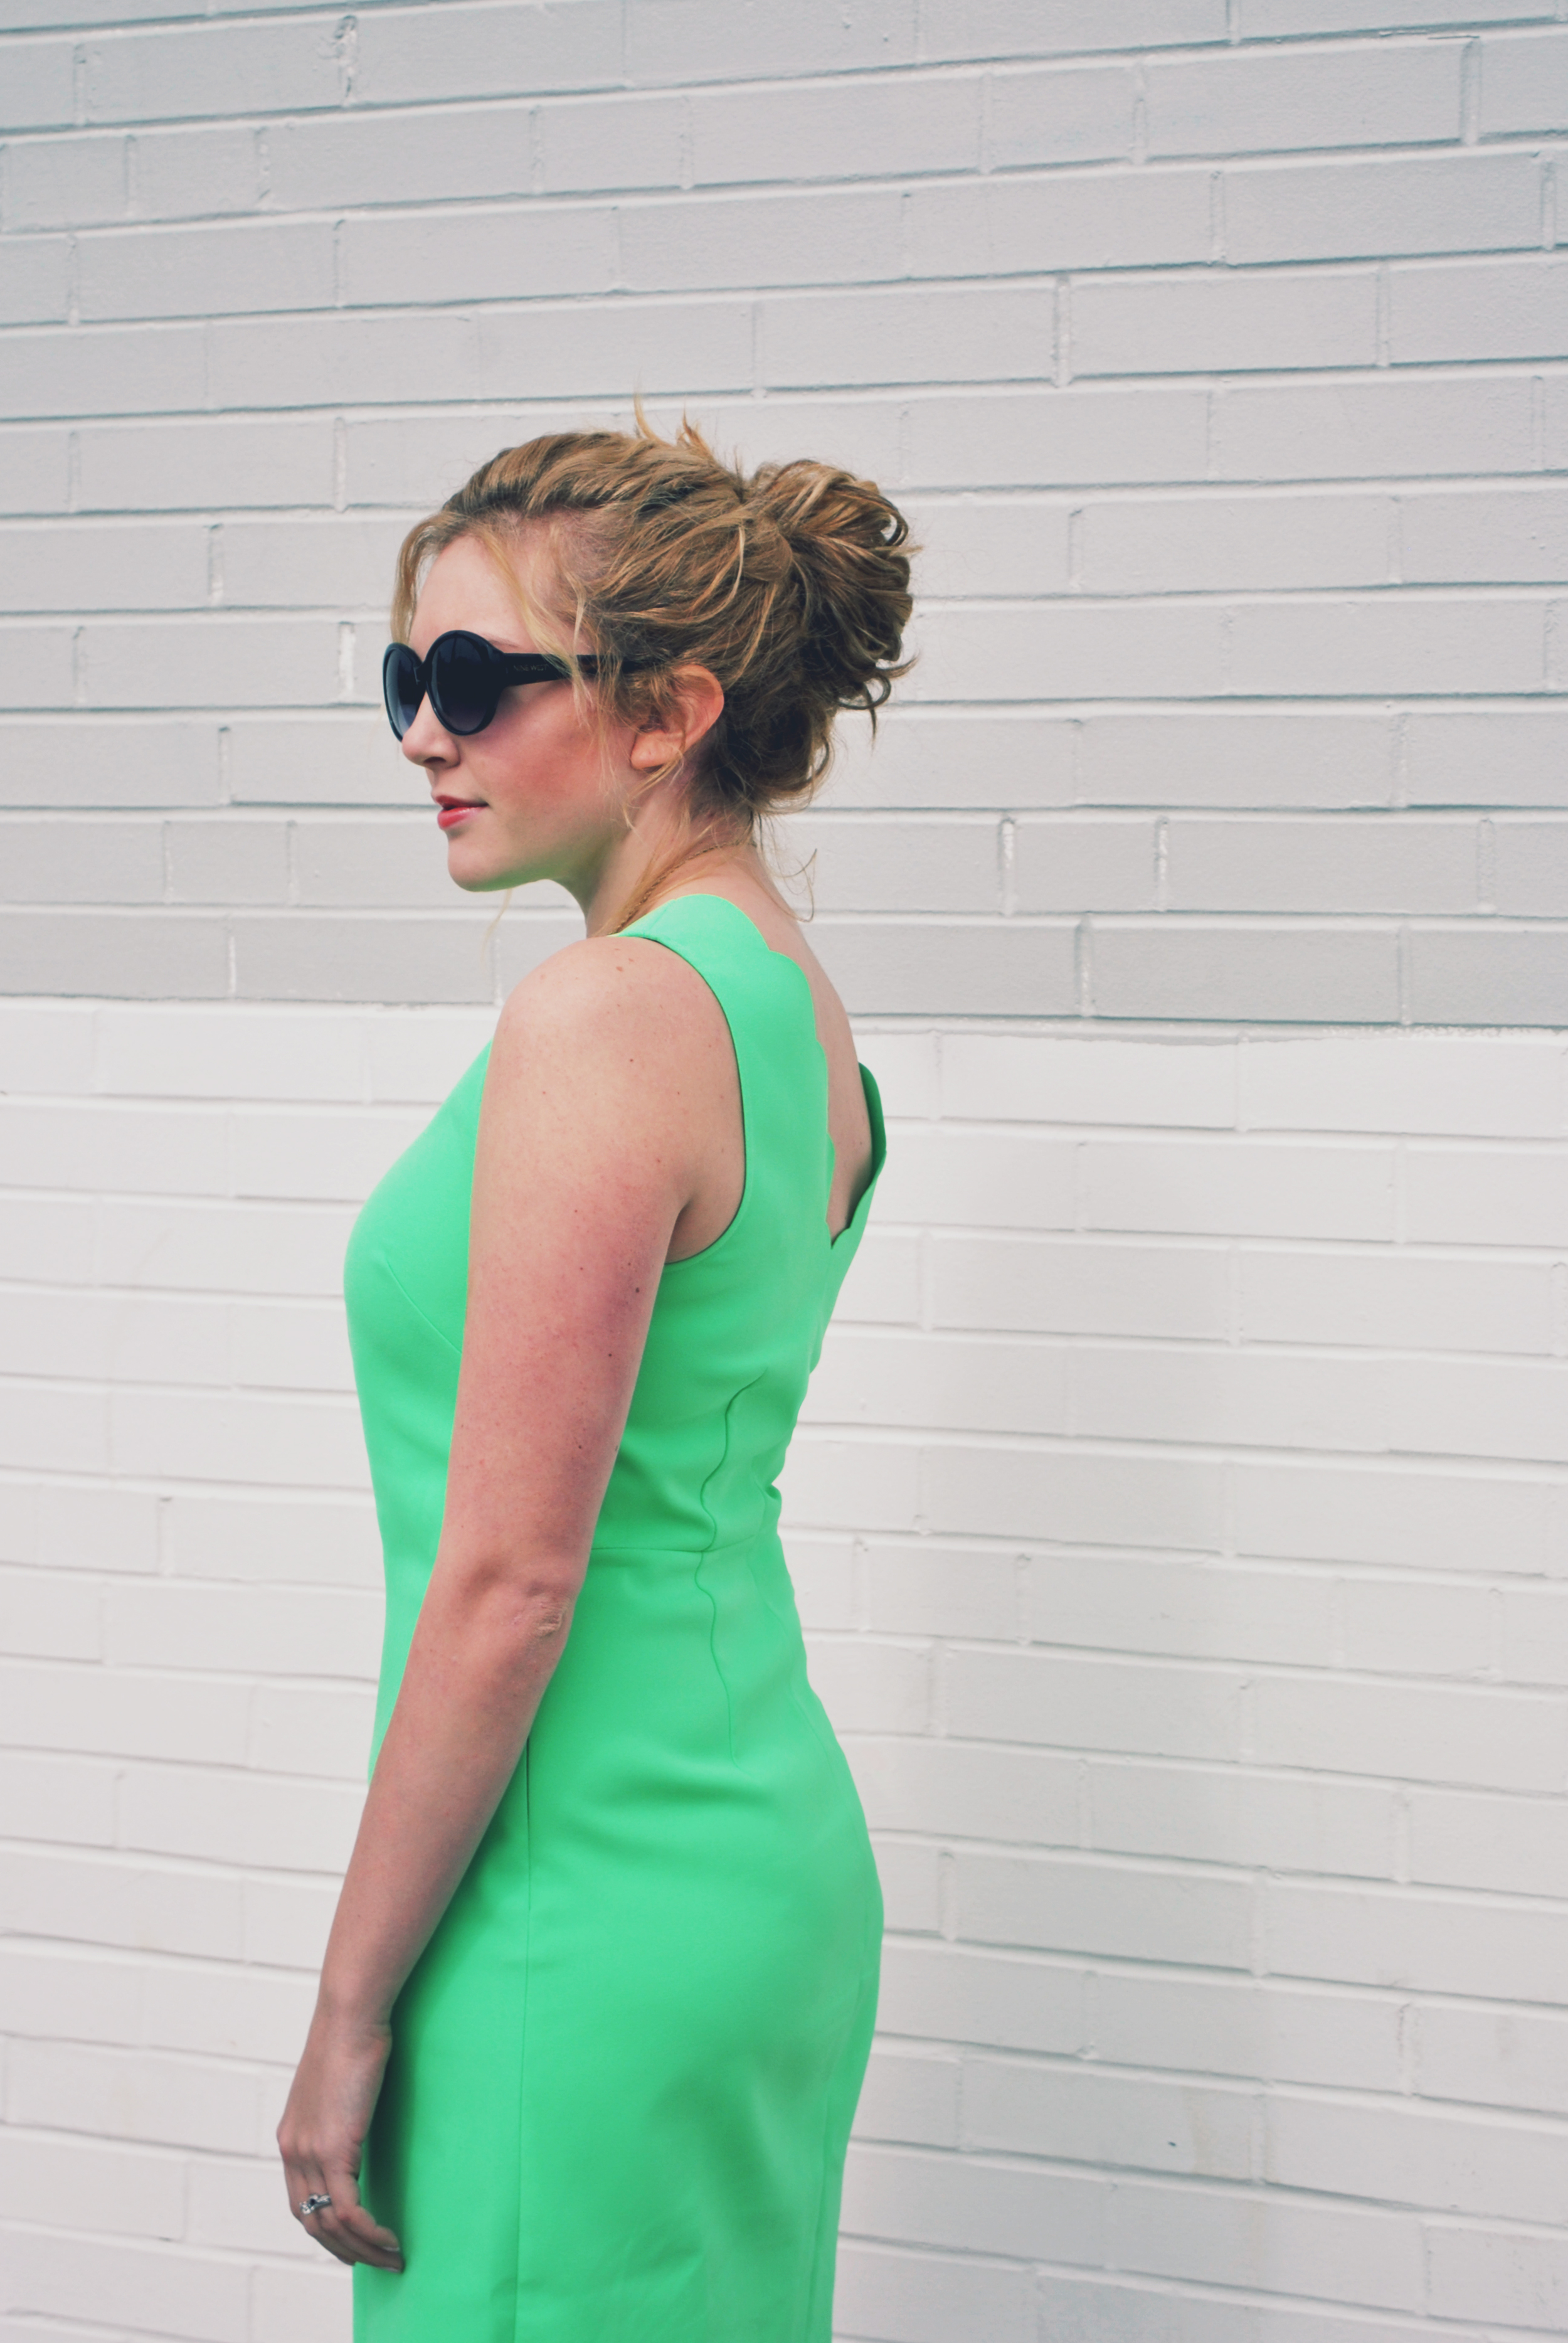 J.crew Factory Scallop Dress // green scallop dress // day to night outfit // preppy outfit // fashion blogger | thoughtfulwish